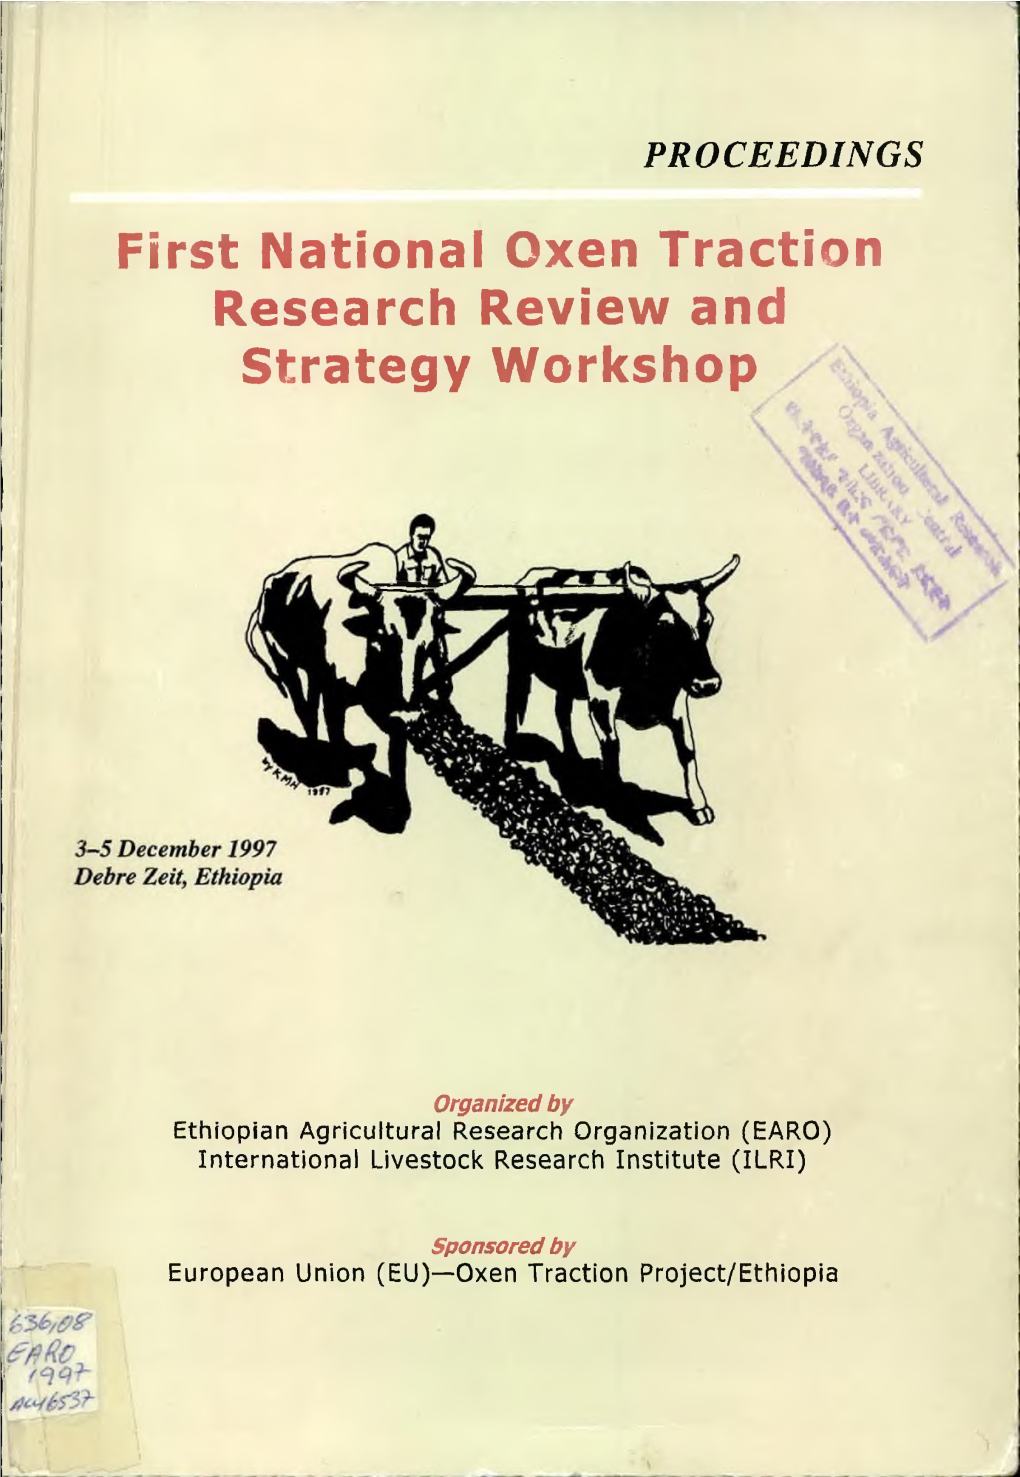 First National Oxen Traction Research Review and Strategy Workshop